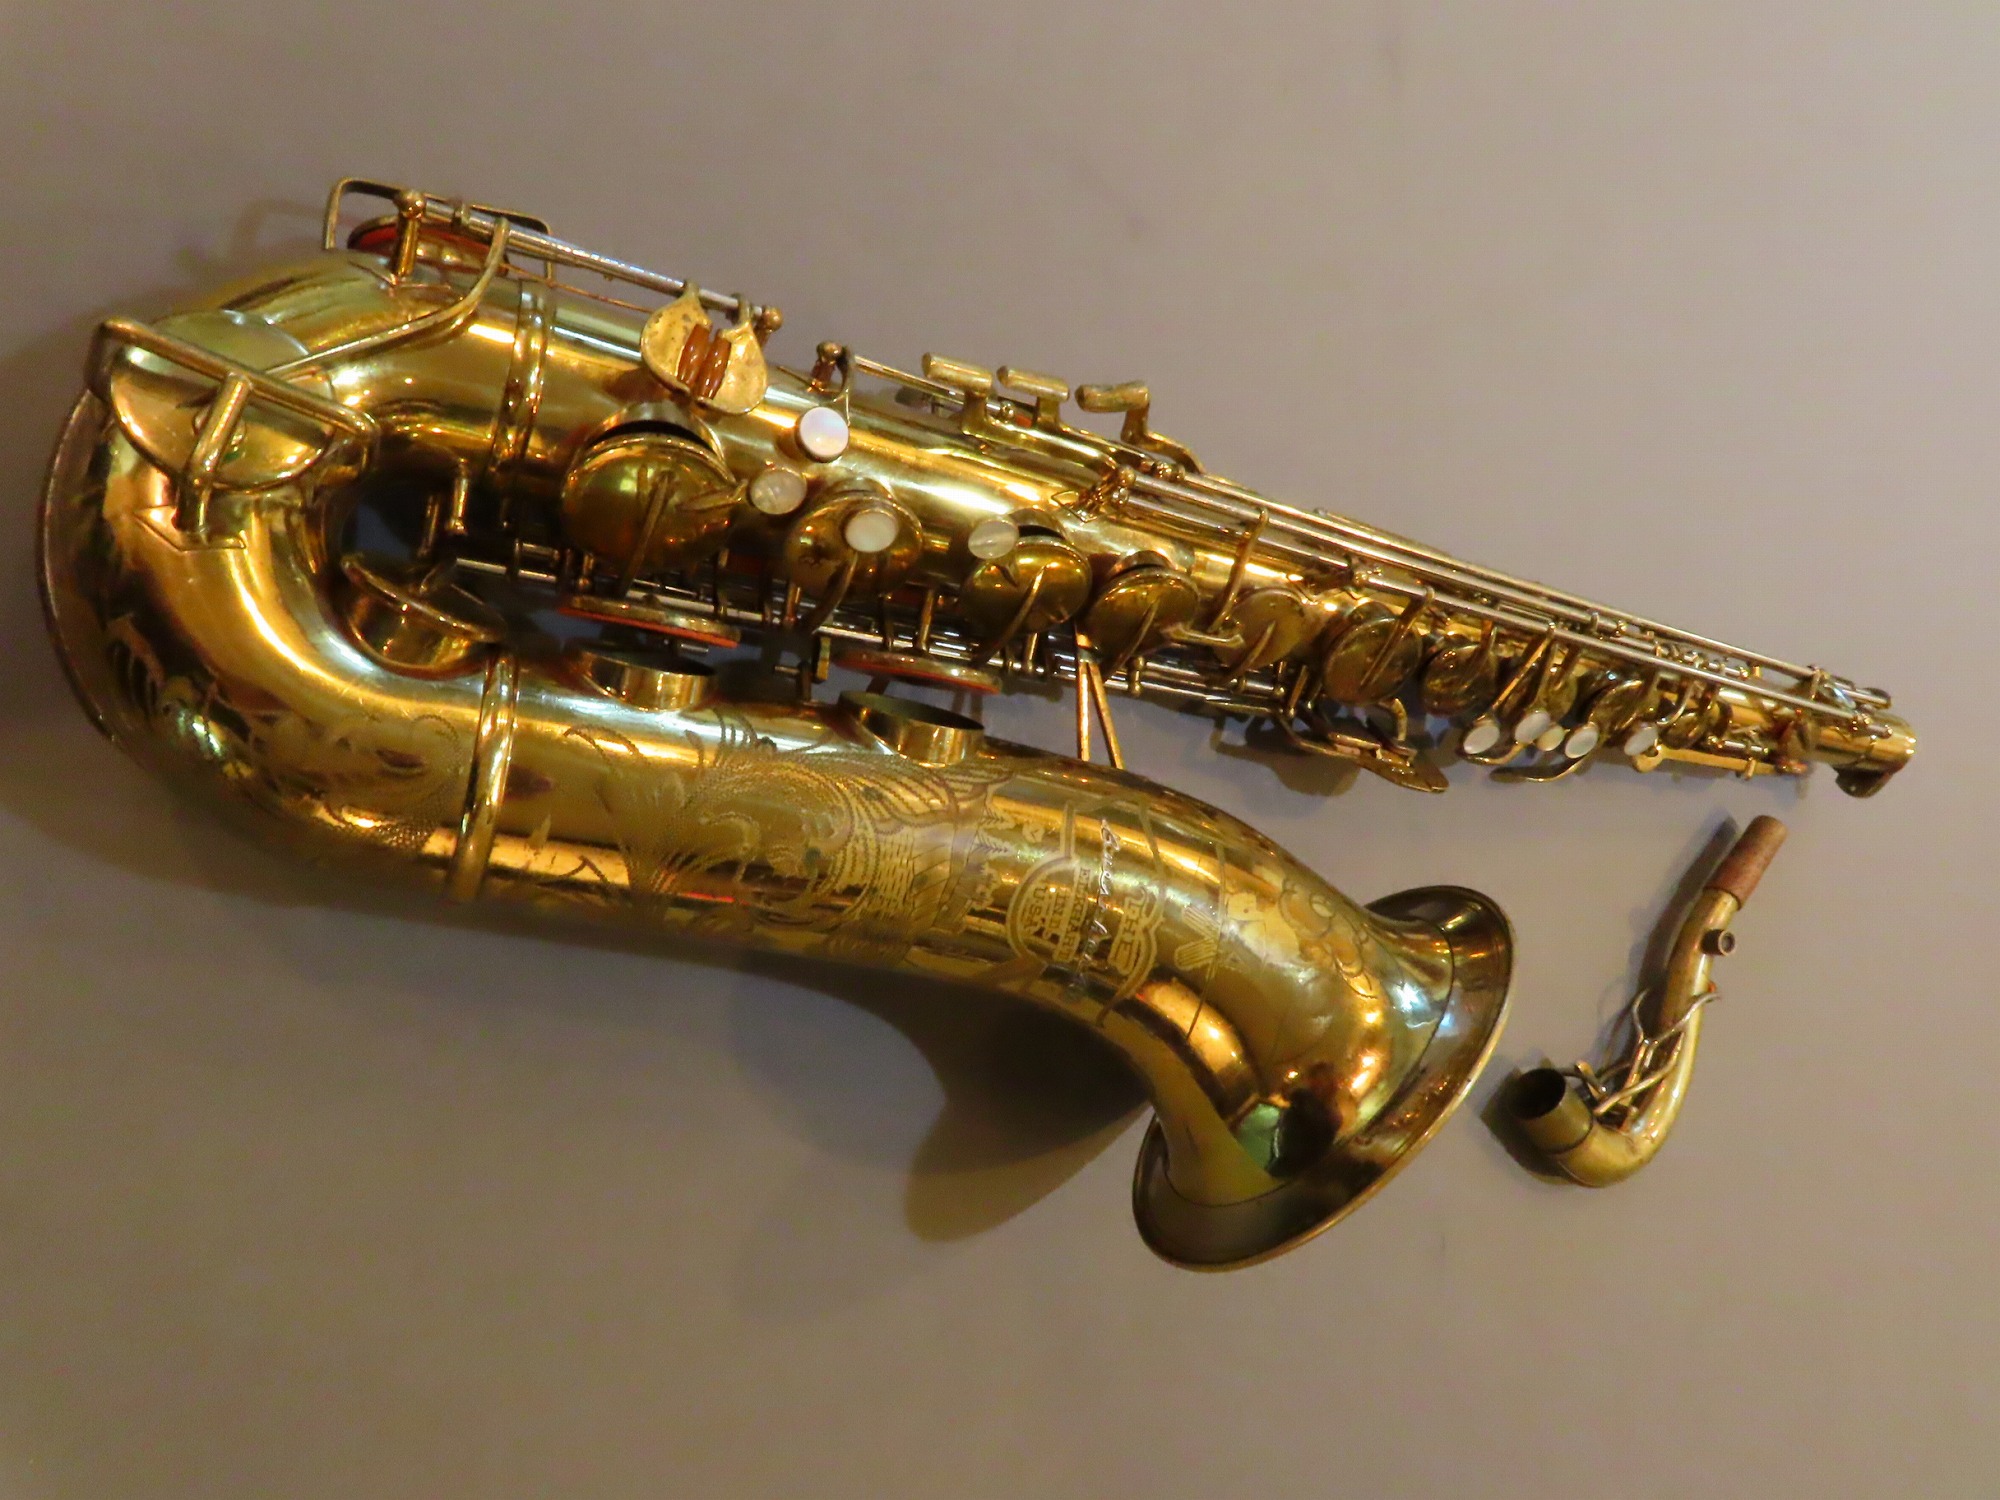 Buescher 400 "Top Hat and Cane" Tenor Sax / ブッシャー４００　トップハット＆ケーン